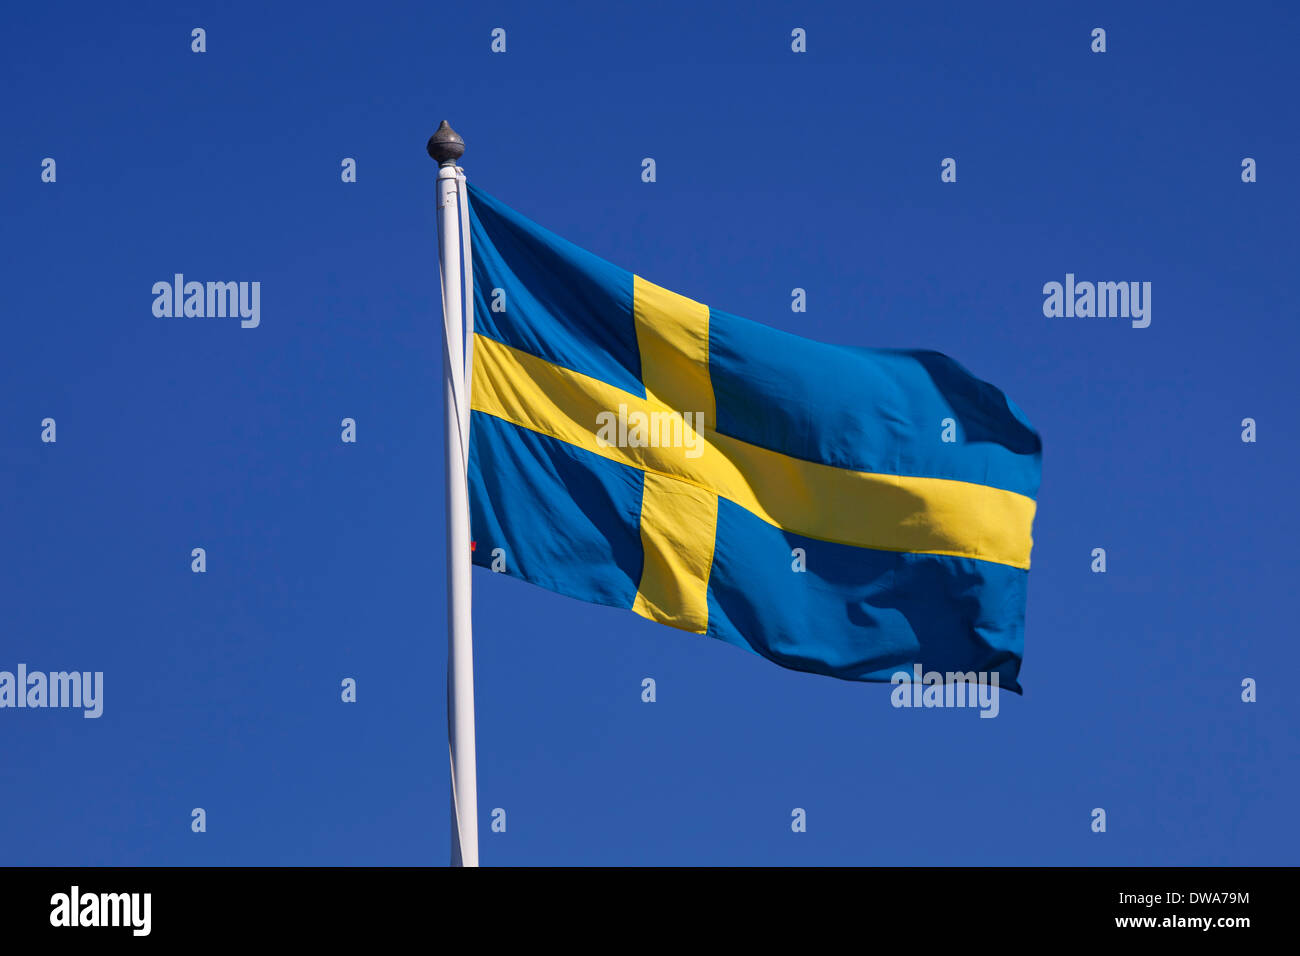 National flag of Sweden flapping in the wind against blue sky Stock Photo